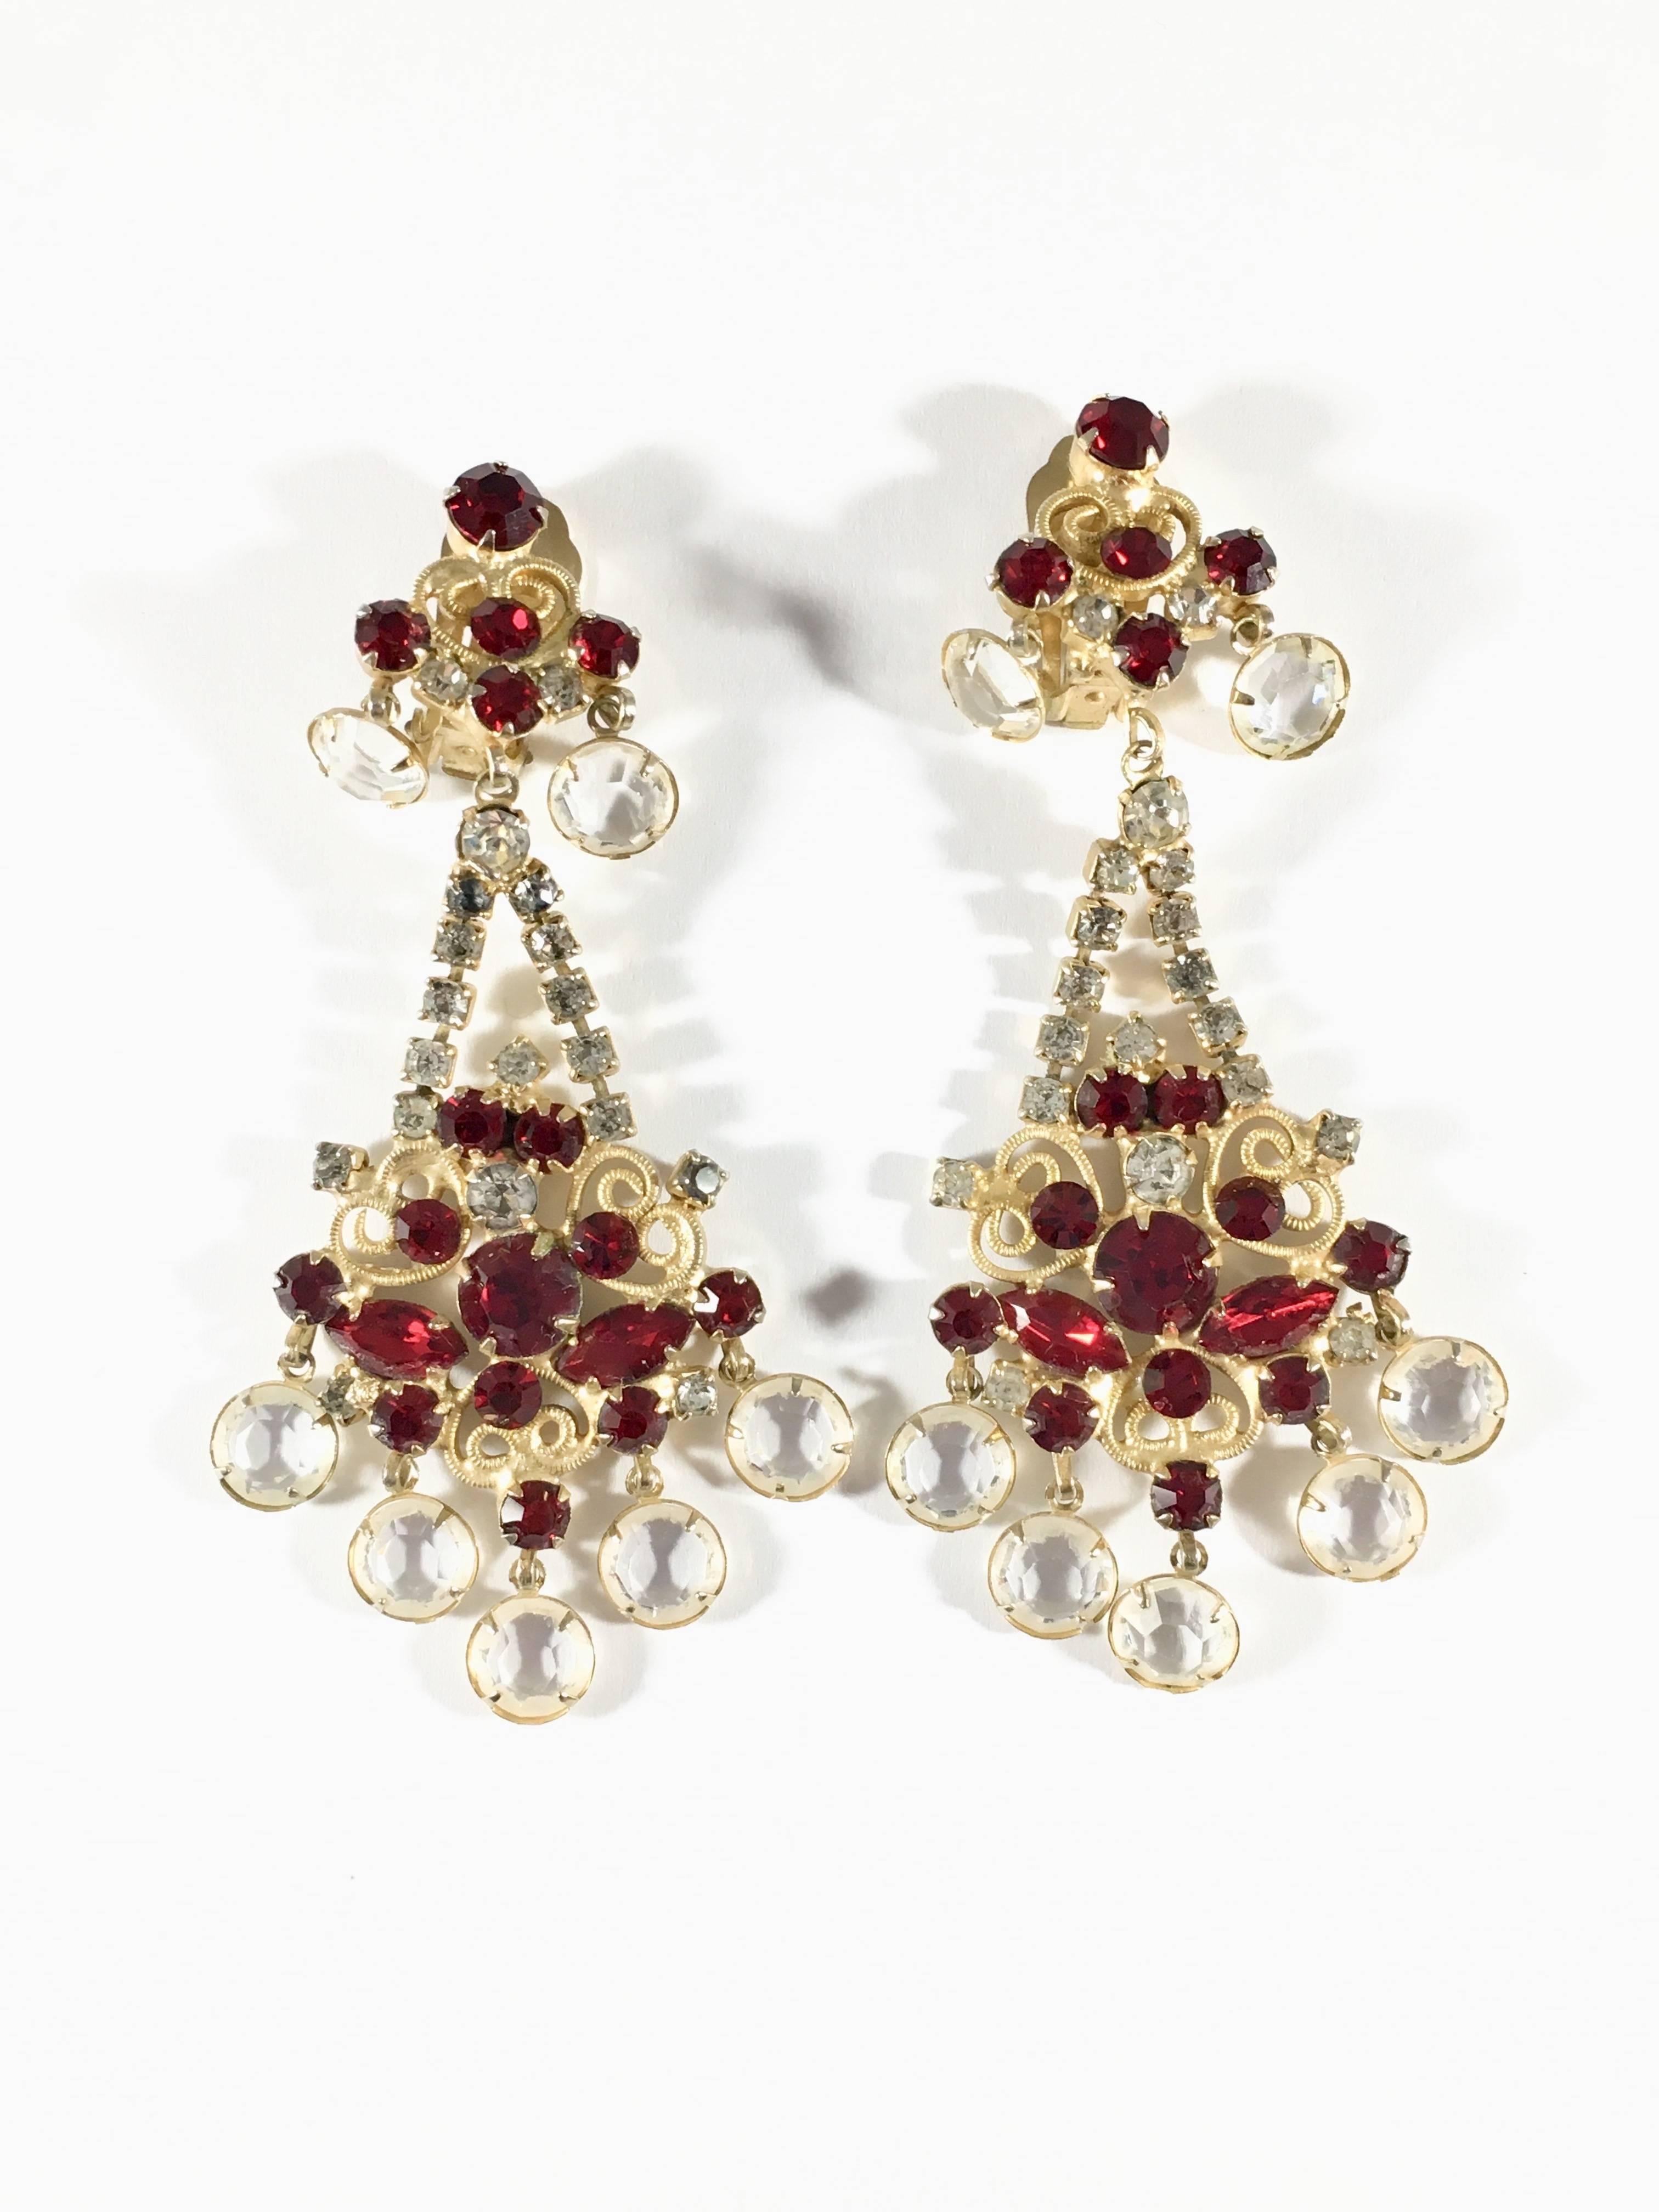 This is a beautiful pair of 1960s Kenneth Jay Lane clip-on chandelier earrings made out of clear and red glass crystal stones. They are 3 3/4 inches long x 1 3/4 inches wide. They are marked 'K.J.L.' on the backs of the earrings - the earliest mark